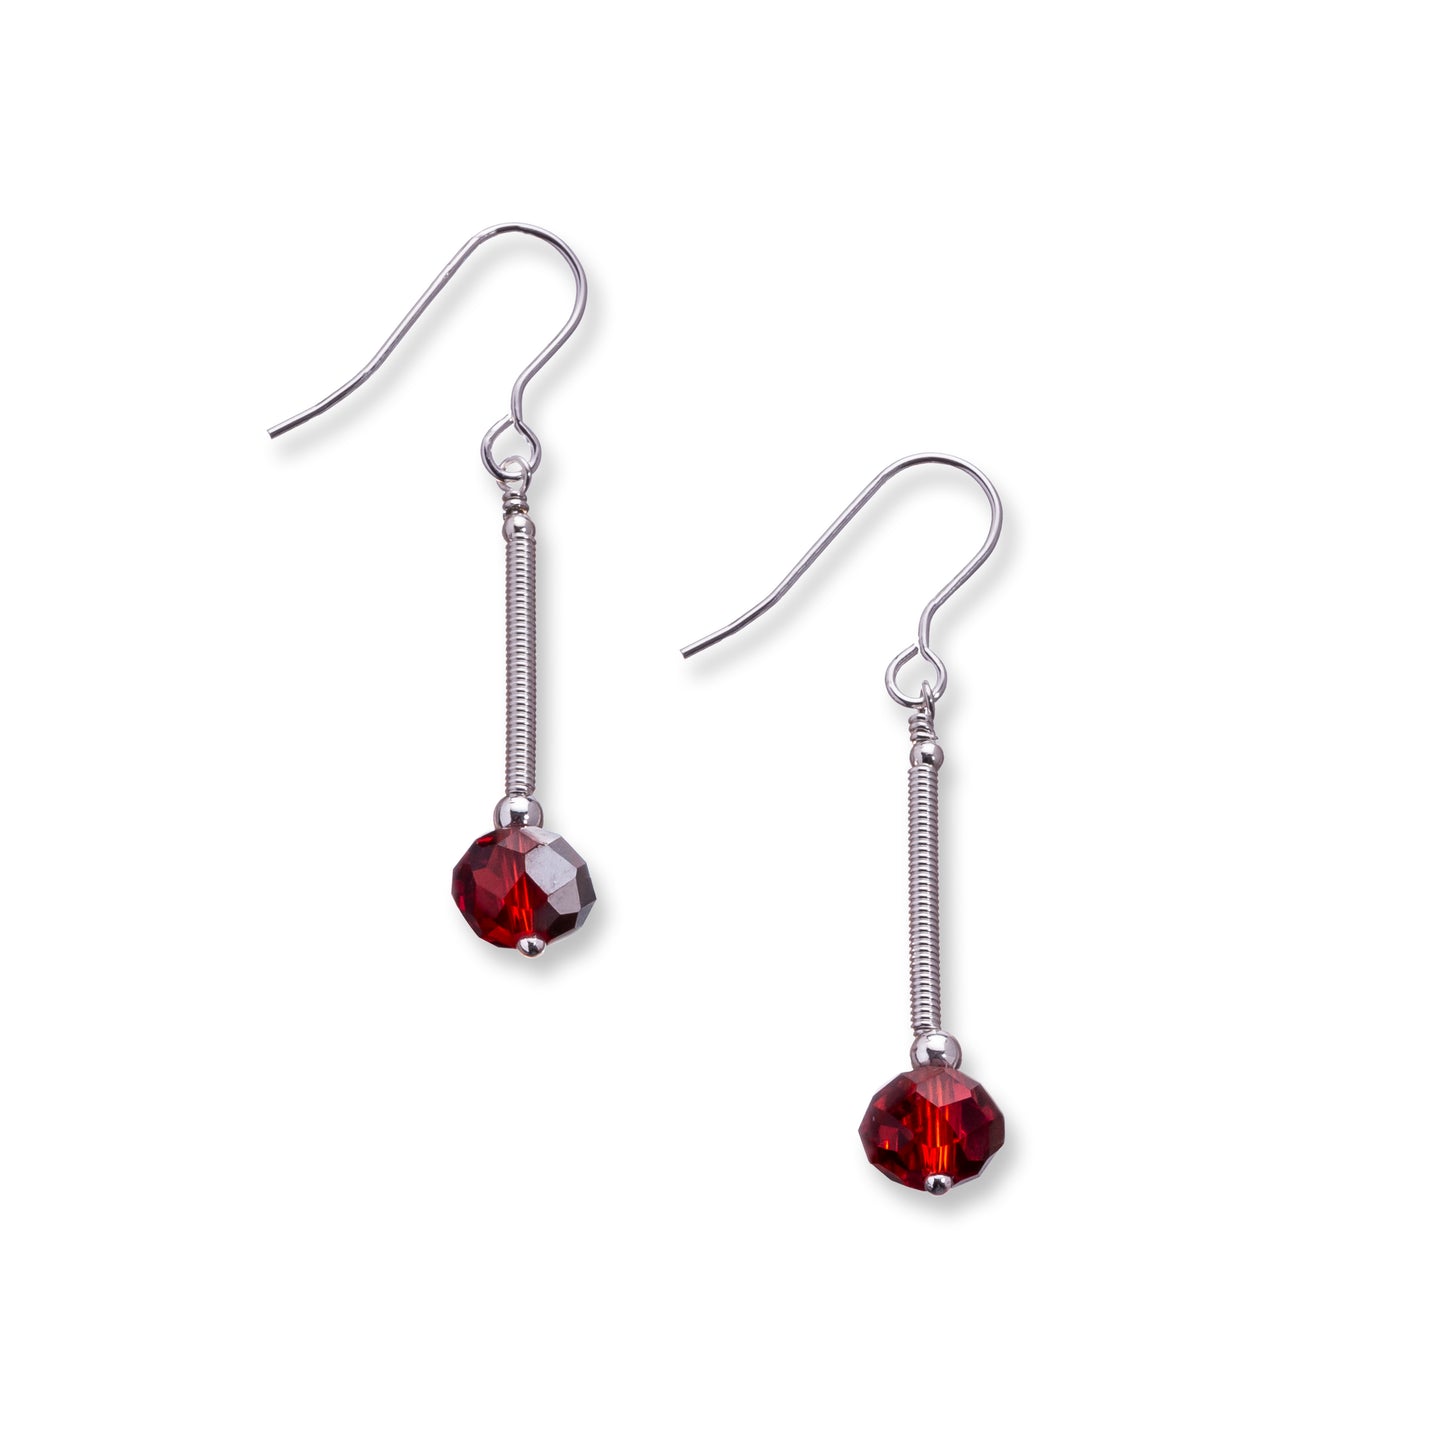 Crystal drops made from hand coiled silver filled tubes, sterling silver beads and faceted crystals in a choice of three colours, rich red, deep teal blue and soft llight pink.These earrings sit on sterling silver ear wires and come with backs included. The drop length 3cm and is measured from the base of the ear wire. They are lightweight and come beautifully presented in an eco friendly branded gift box for safe keeping. Designed & Handmade in Dingle